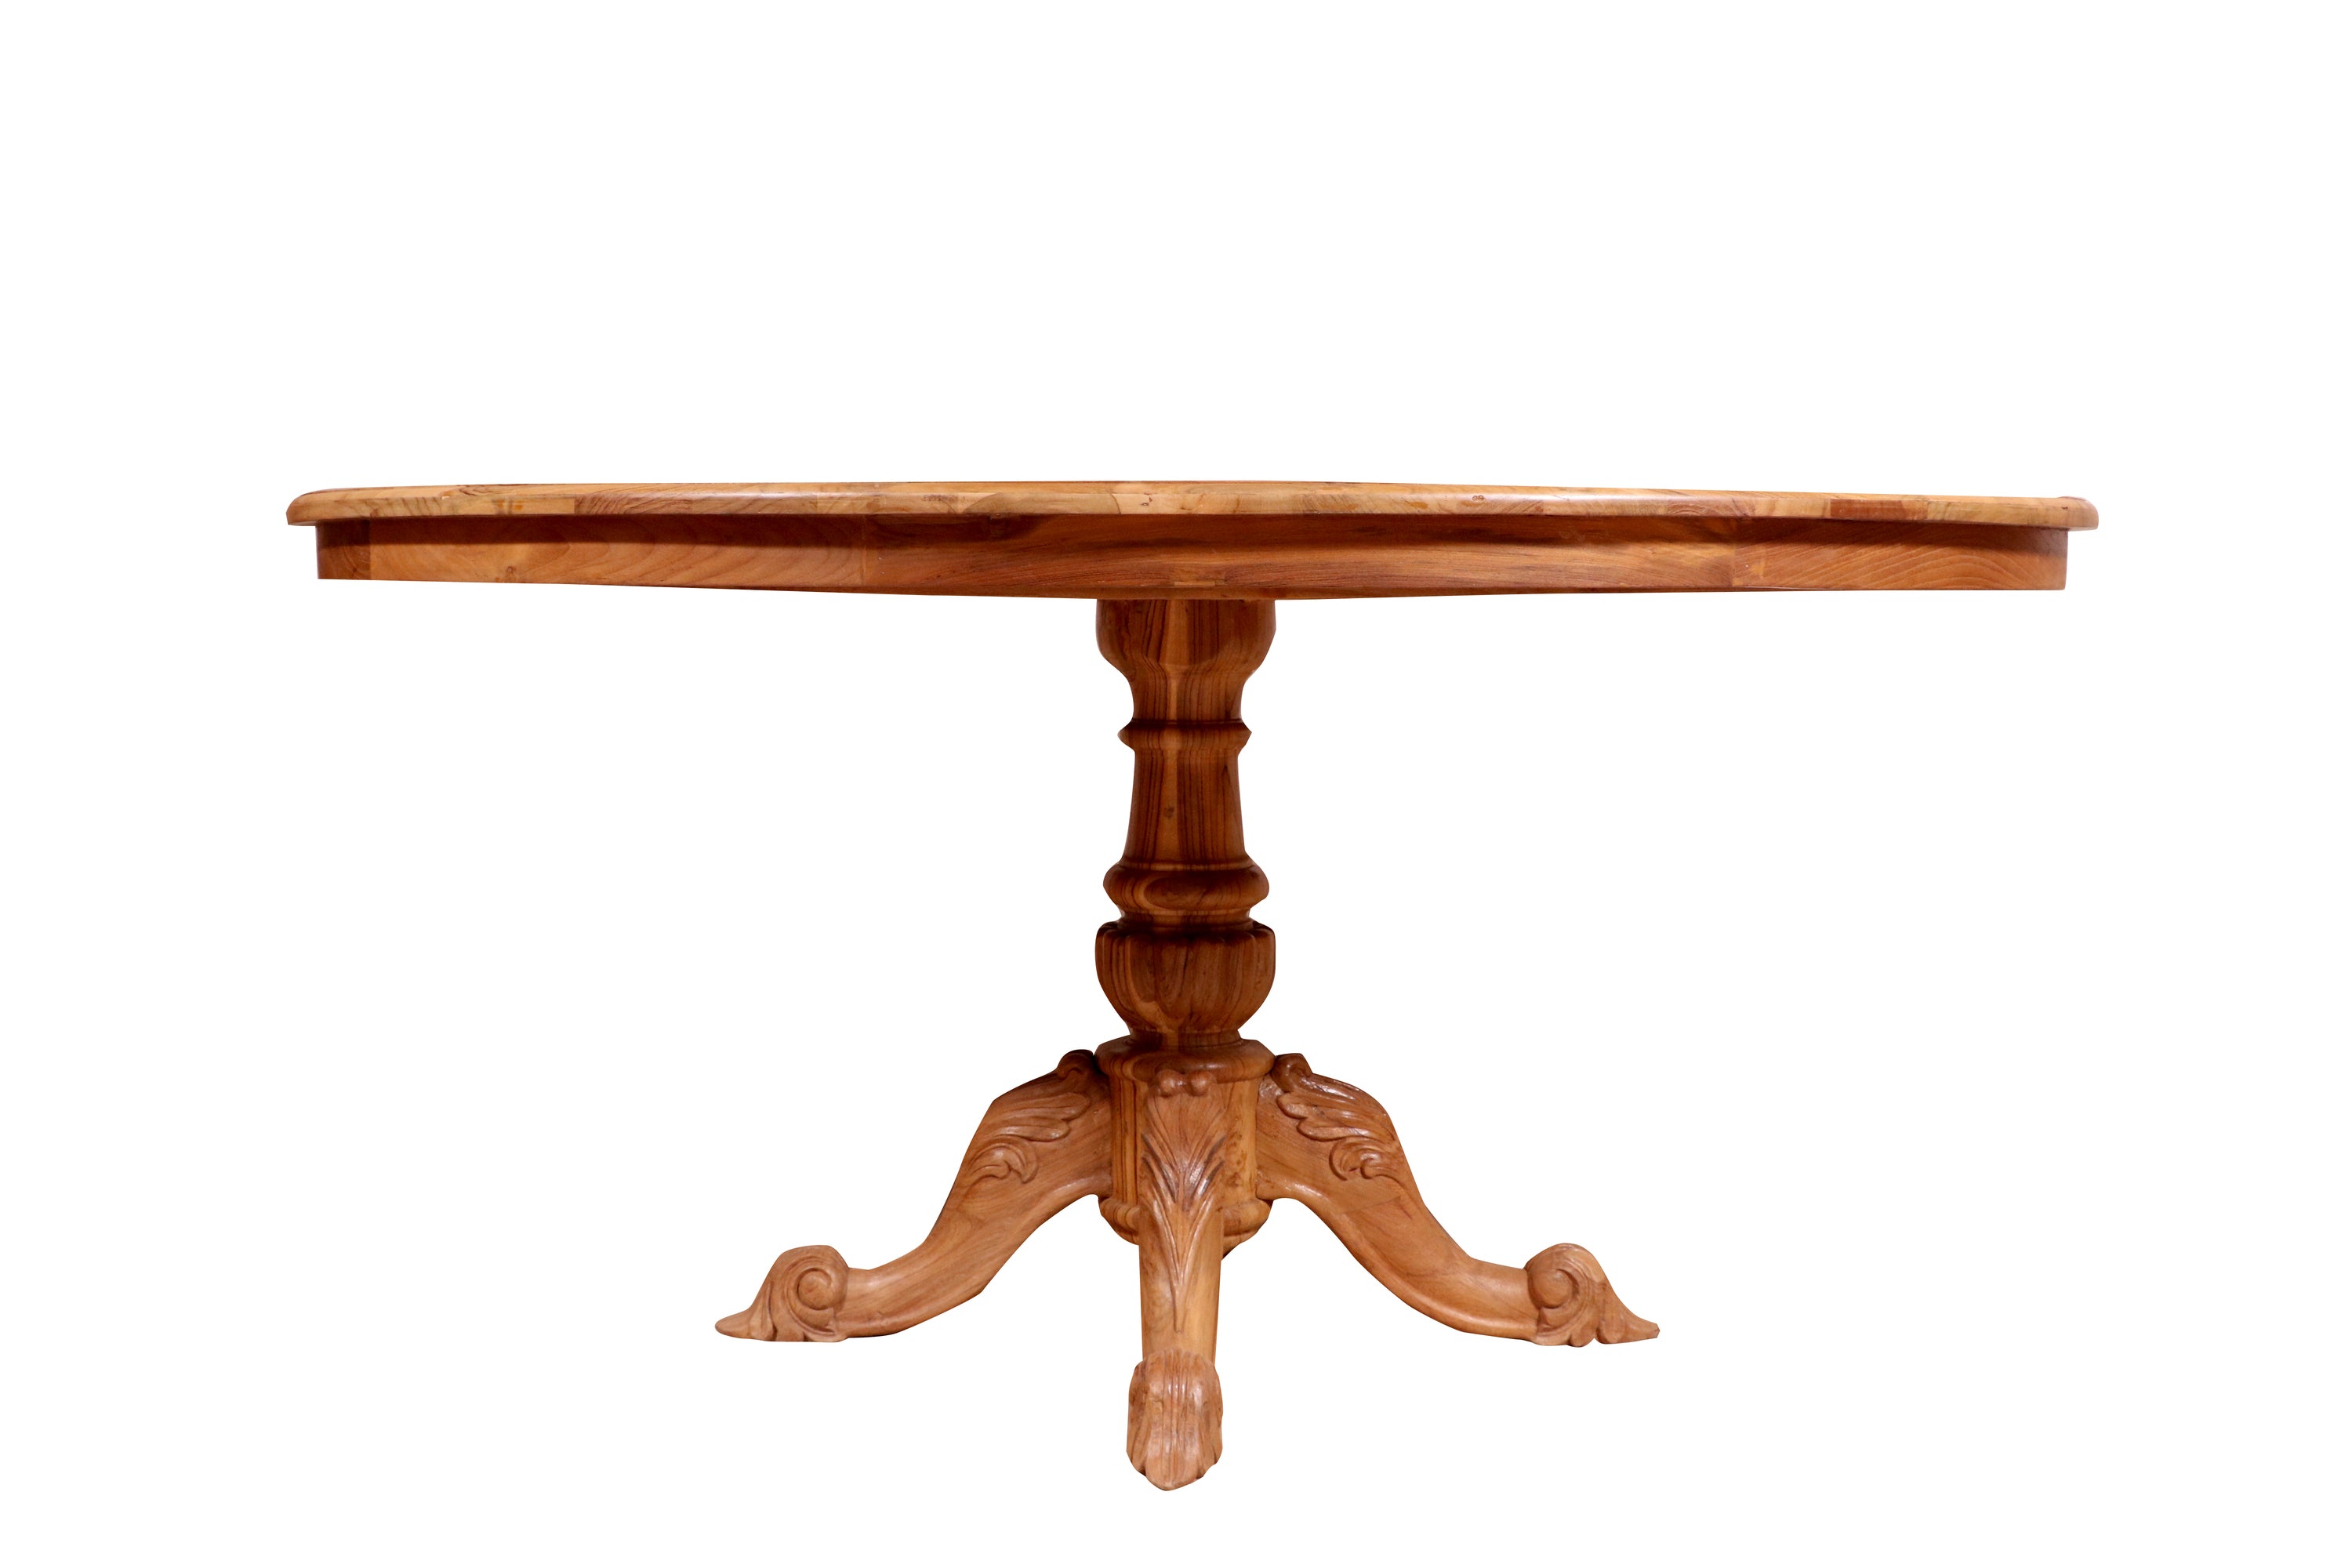 Oval shaped teak wood dining table Dining Table